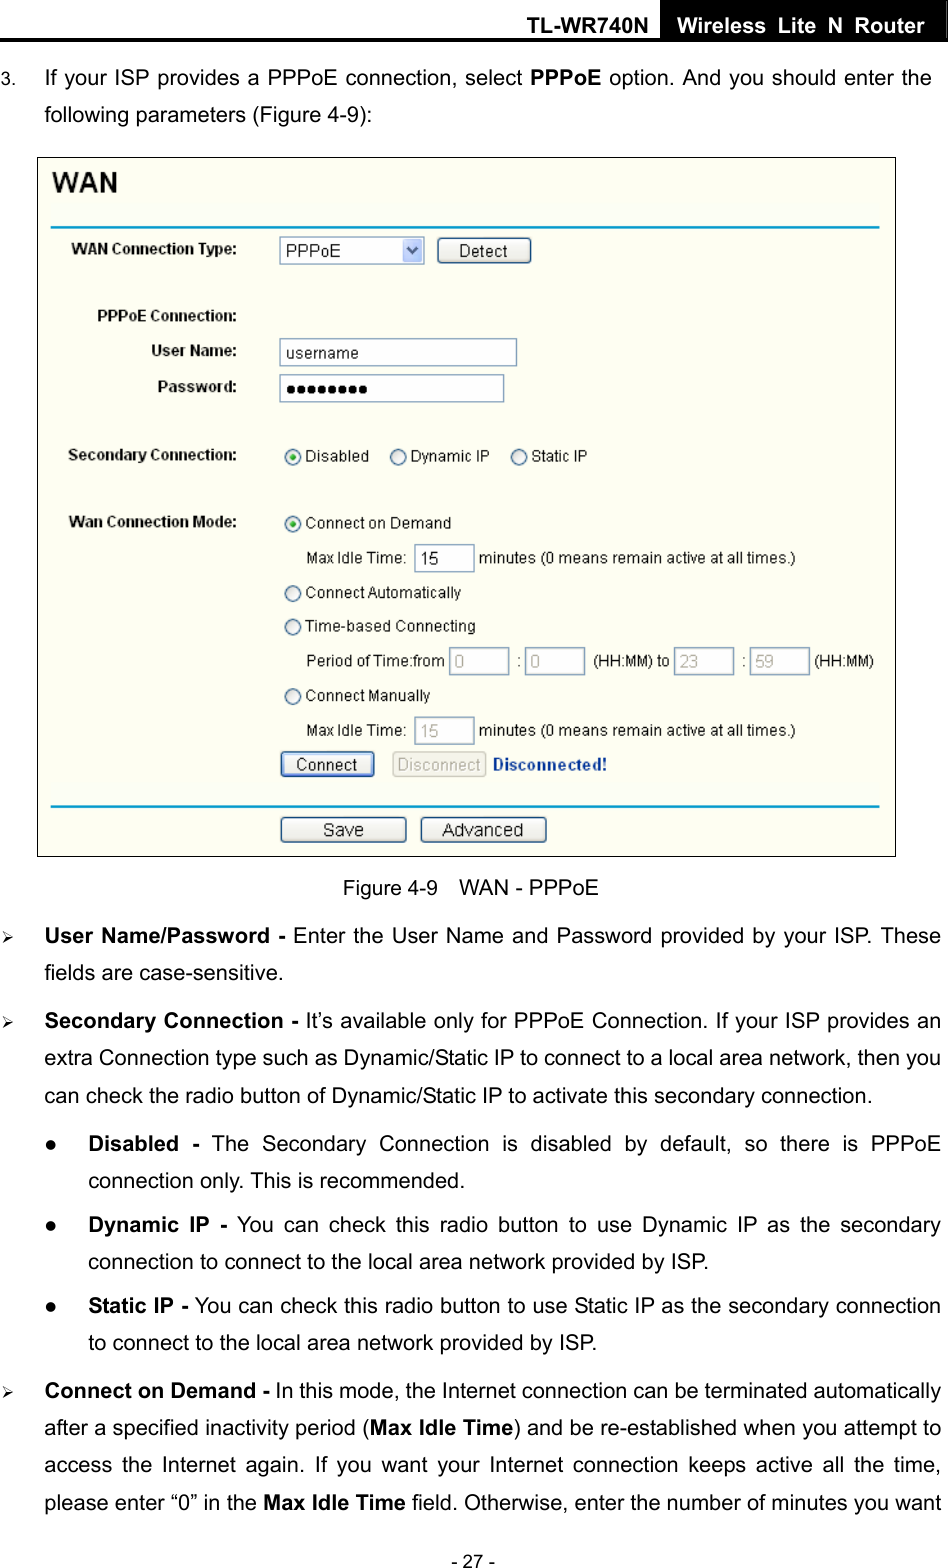 TL-WR740N Wireless Lite N Router  - 27 - 3.  If your ISP provides a PPPoE connection, select PPPoE option. And you should enter the following parameters (Figure 4-9):  Figure 4-9    WAN - PPPoE ¾ User Name/Password - Enter the User Name and Password provided by your ISP. These fields are case-sensitive. ¾ Secondary Connection - It’s available only for PPPoE Connection. If your ISP provides an extra Connection type such as Dynamic/Static IP to connect to a local area network, then you can check the radio button of Dynamic/Static IP to activate this secondary connection. z Disabled - The Secondary Connection is disabled by default, so there is PPPoE connection only. This is recommended. z Dynamic IP -  You can check this radio button to use Dynamic IP as the secondary connection to connect to the local area network provided by ISP. z Static IP - You can check this radio button to use Static IP as the secondary connection to connect to the local area network provided by ISP. ¾ Connect on Demand - In this mode, the Internet connection can be terminated automatically after a specified inactivity period (Max Idle Time) and be re-established when you attempt to access the Internet again. If you want your Internet connection keeps active all the time, please enter “0” in the Max Idle Time field. Otherwise, enter the number of minutes you want 